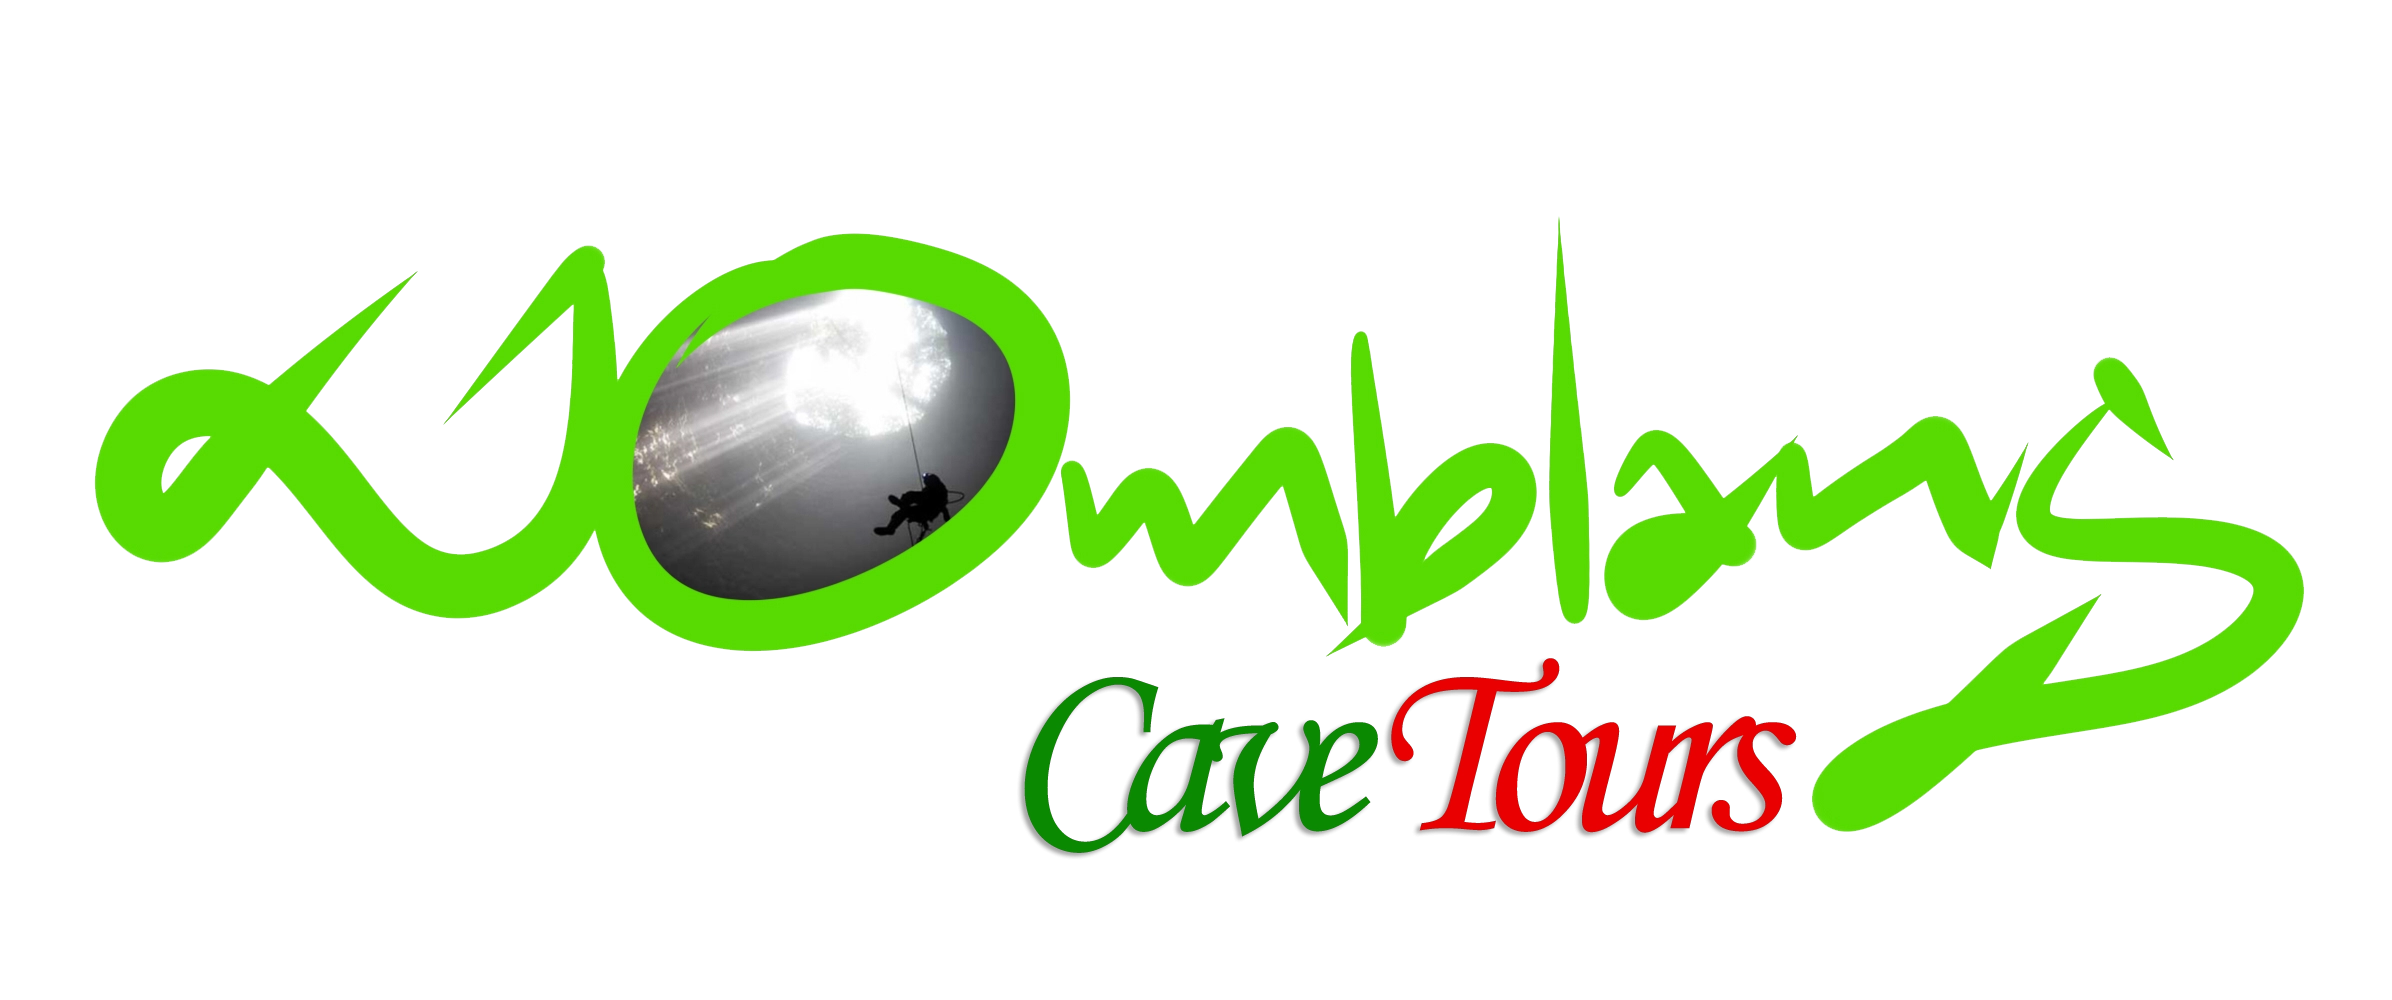 Jomblang Cave Tours